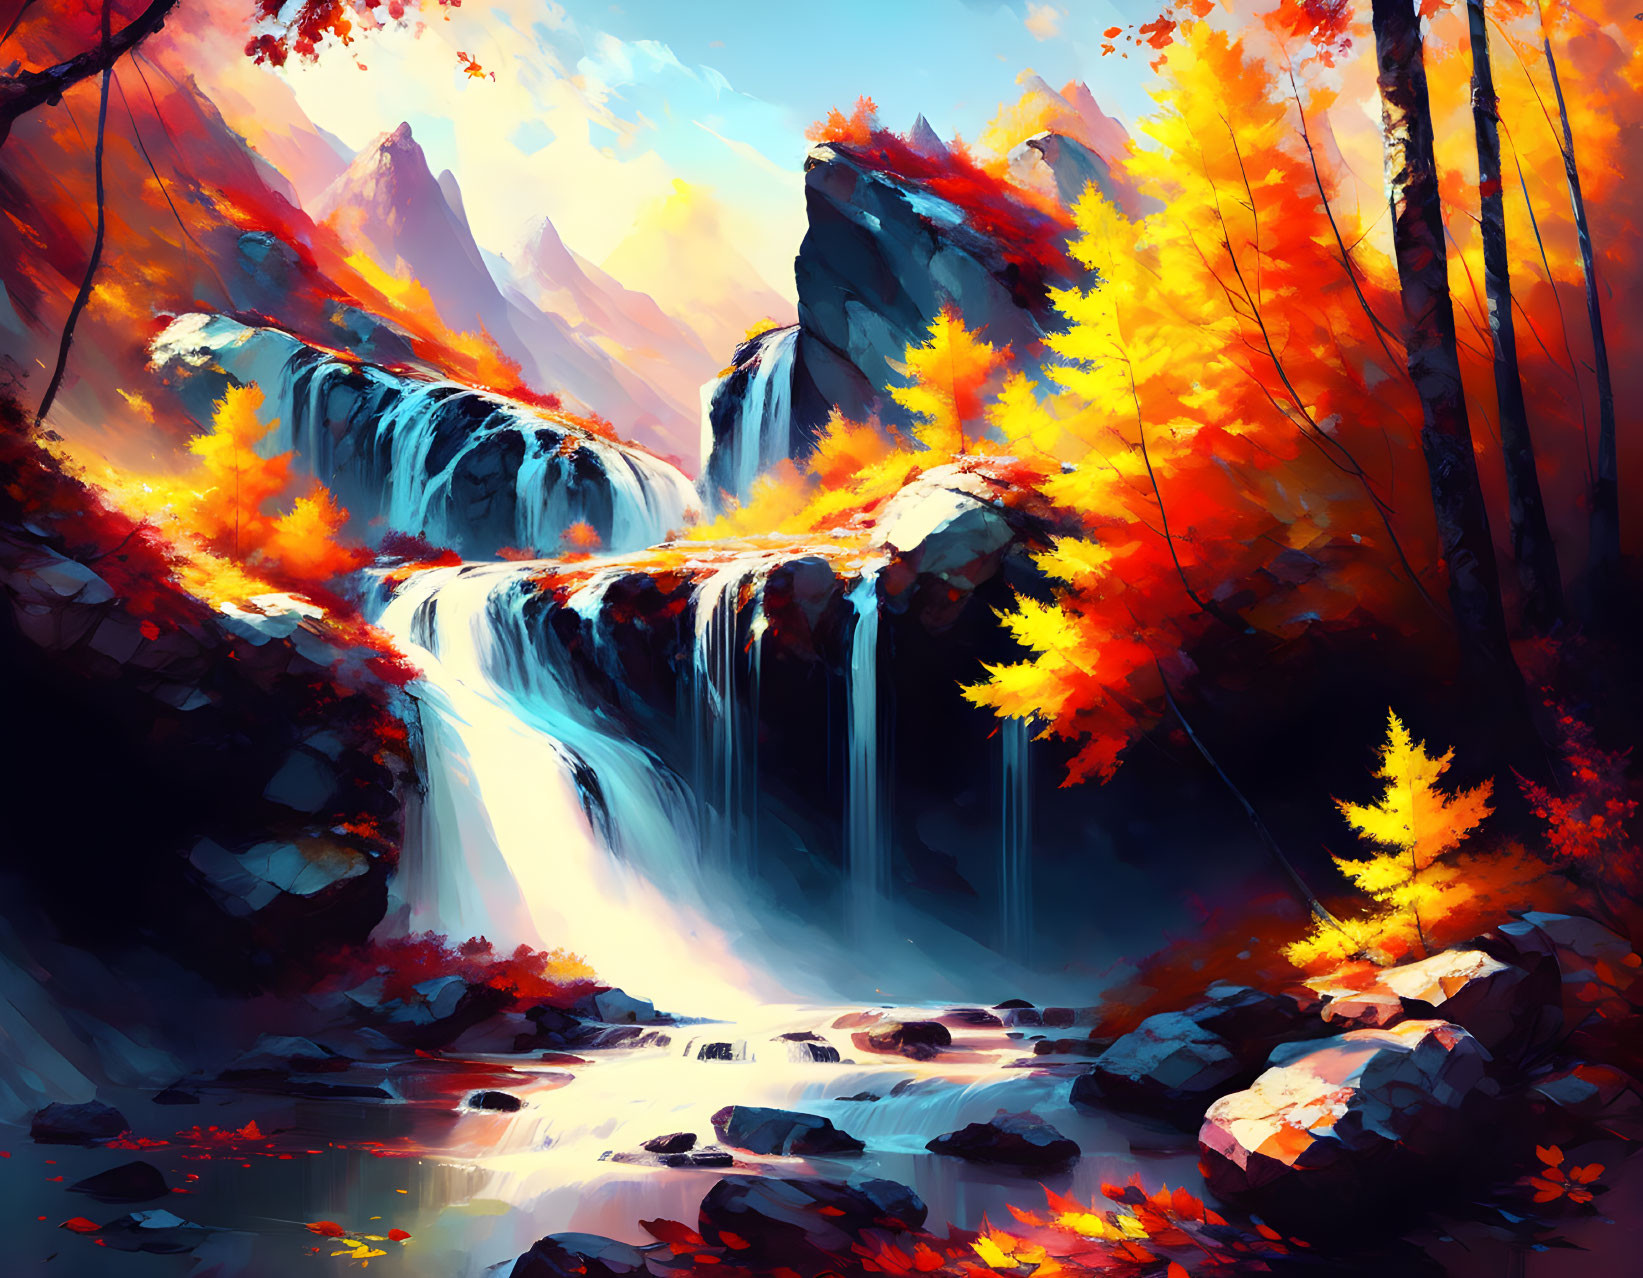 Scenic autumn waterfall with orange and yellow foliage against mountain backdrop